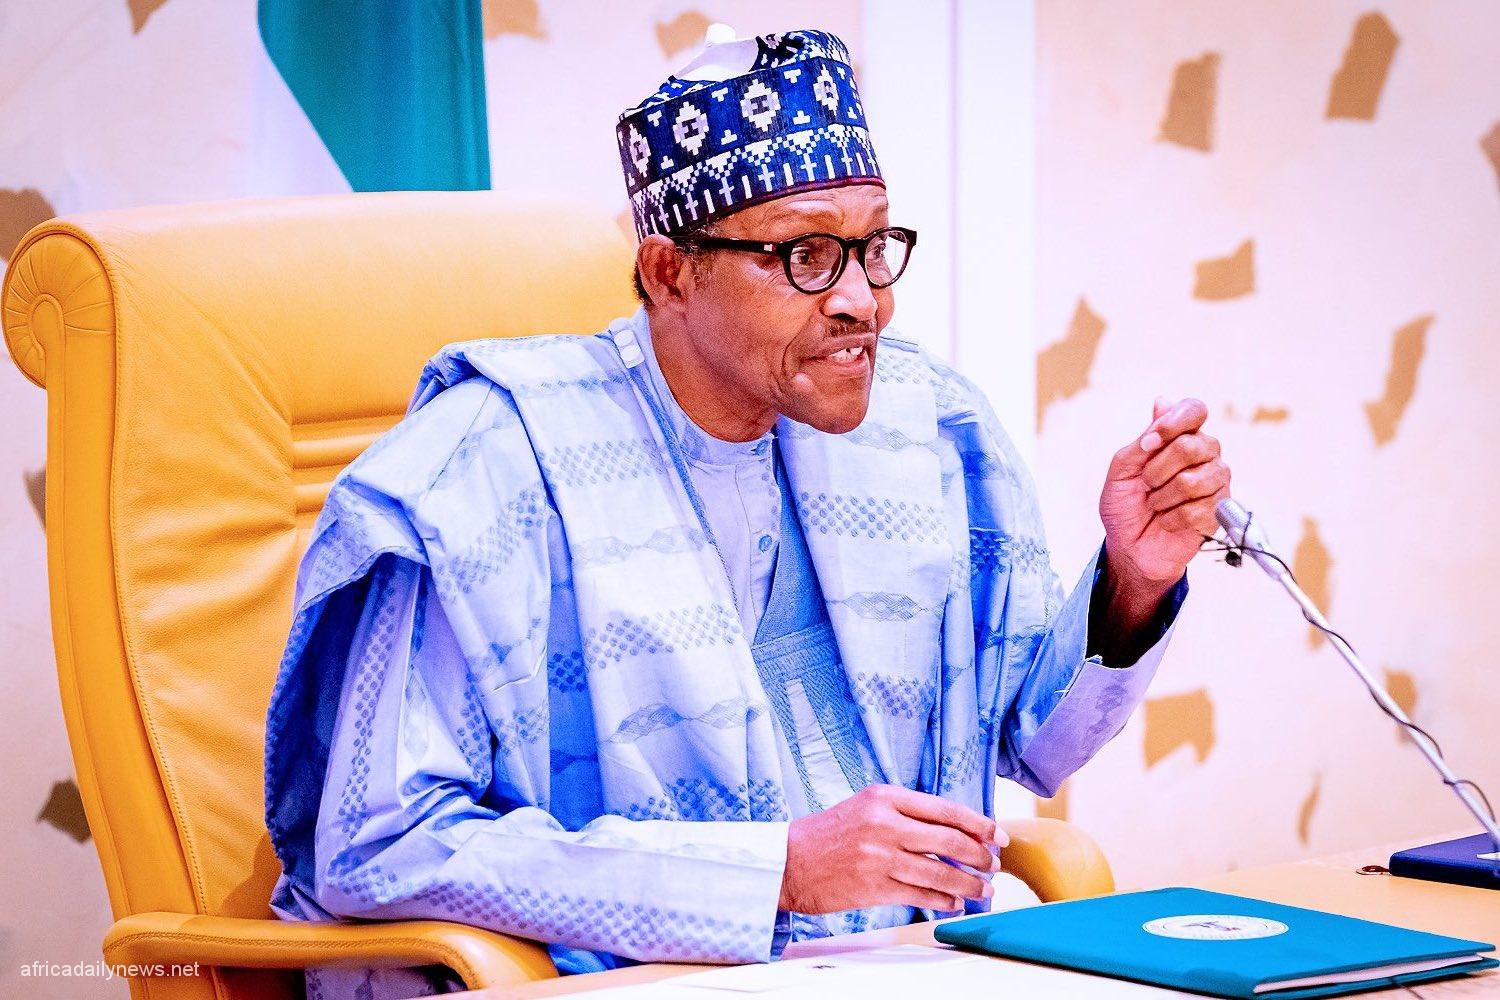 We’re Working On Return Of Kidnapped Victims Of Train Attack – Buhari